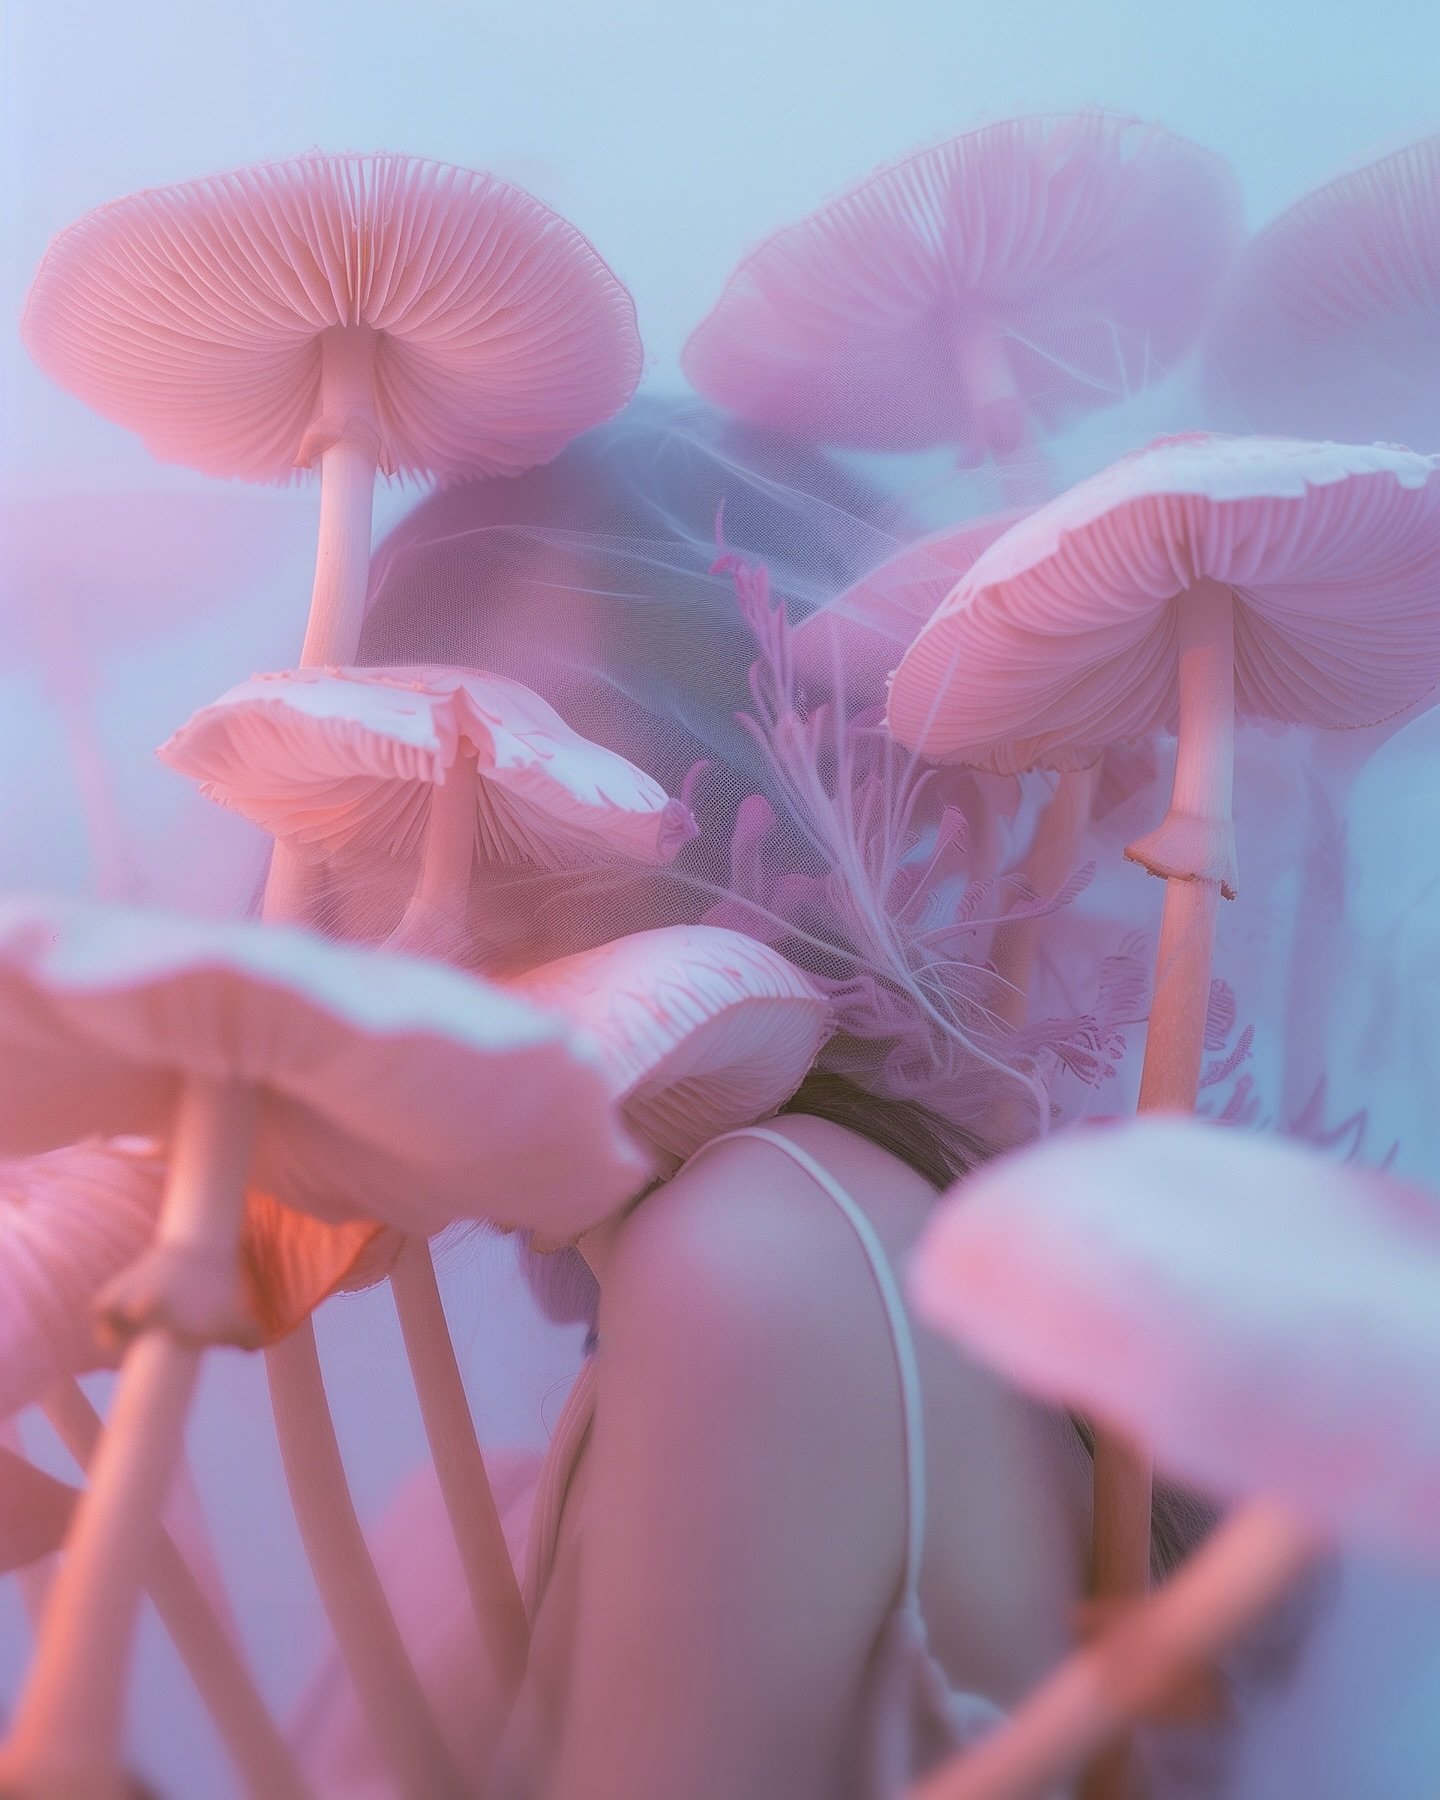 Hiding (escaping).
.
.
Created for FACELESS by @blursed_montage 

#dreamcore #mushrooms #landofblursed